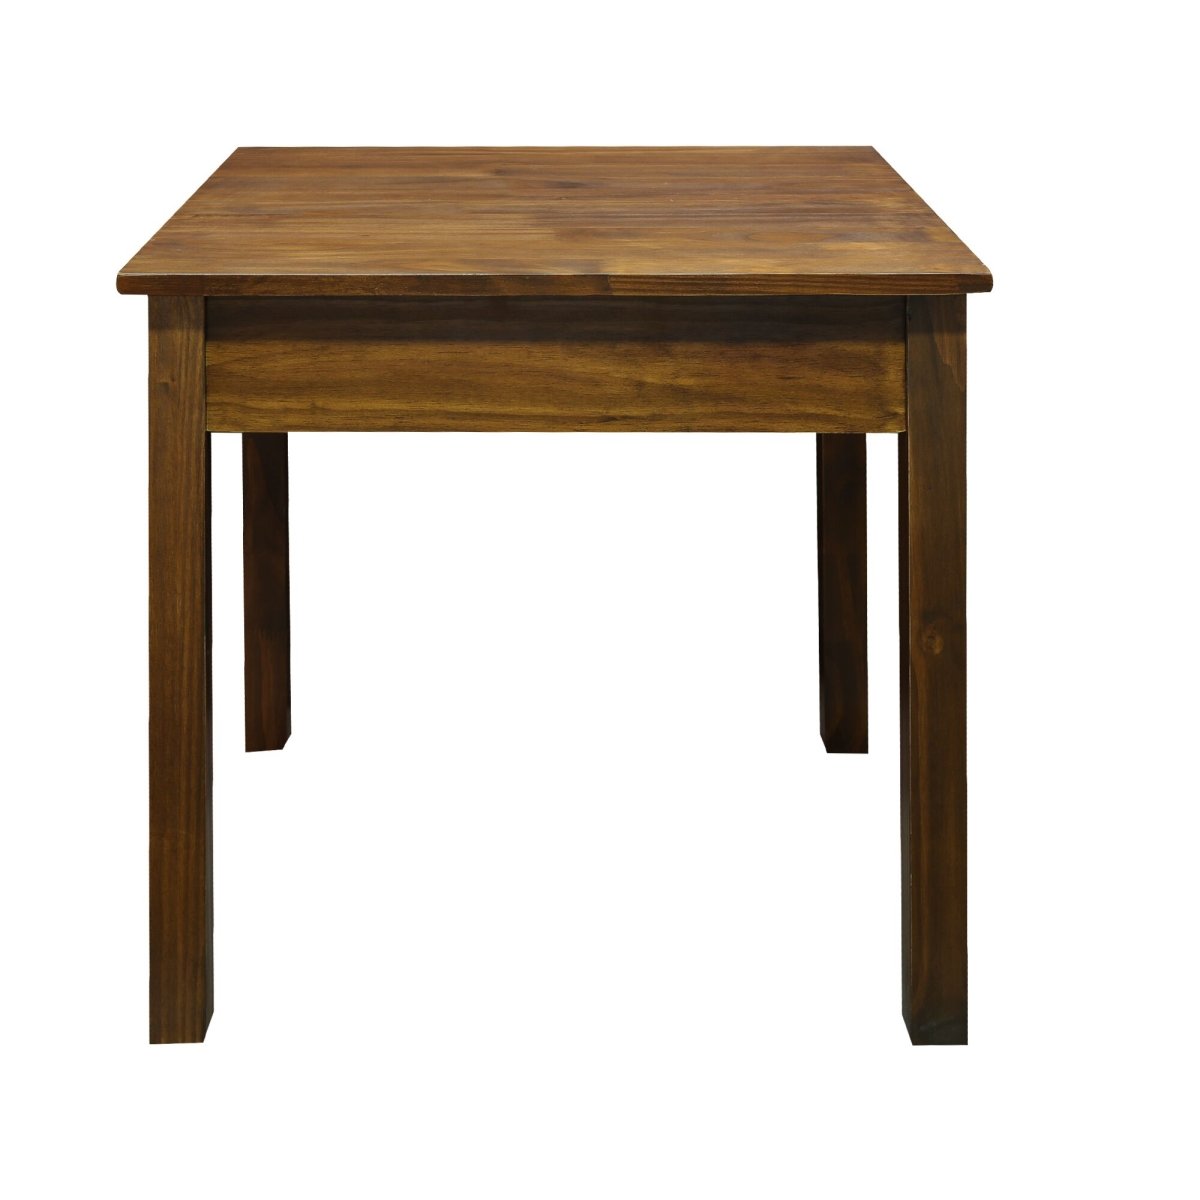 615-15 Kennedy End Table With Concealed Drawer, Concealment Furniture - Warm Brown